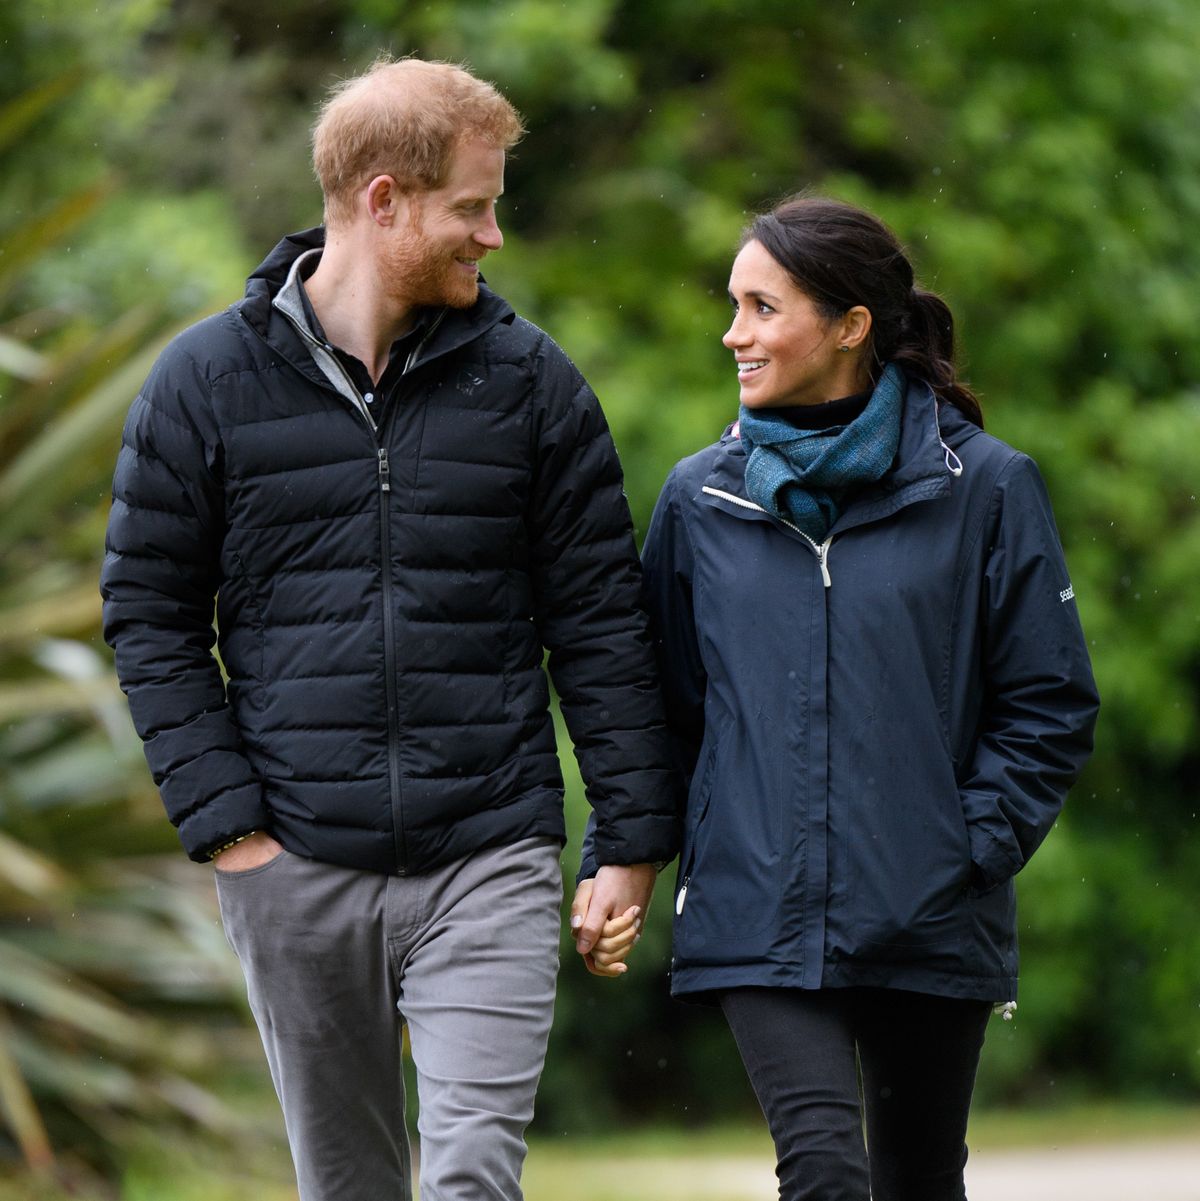 meghan markle prince harryThe Duke And Duchess Of Sussex Visit New Zealand - Day 2